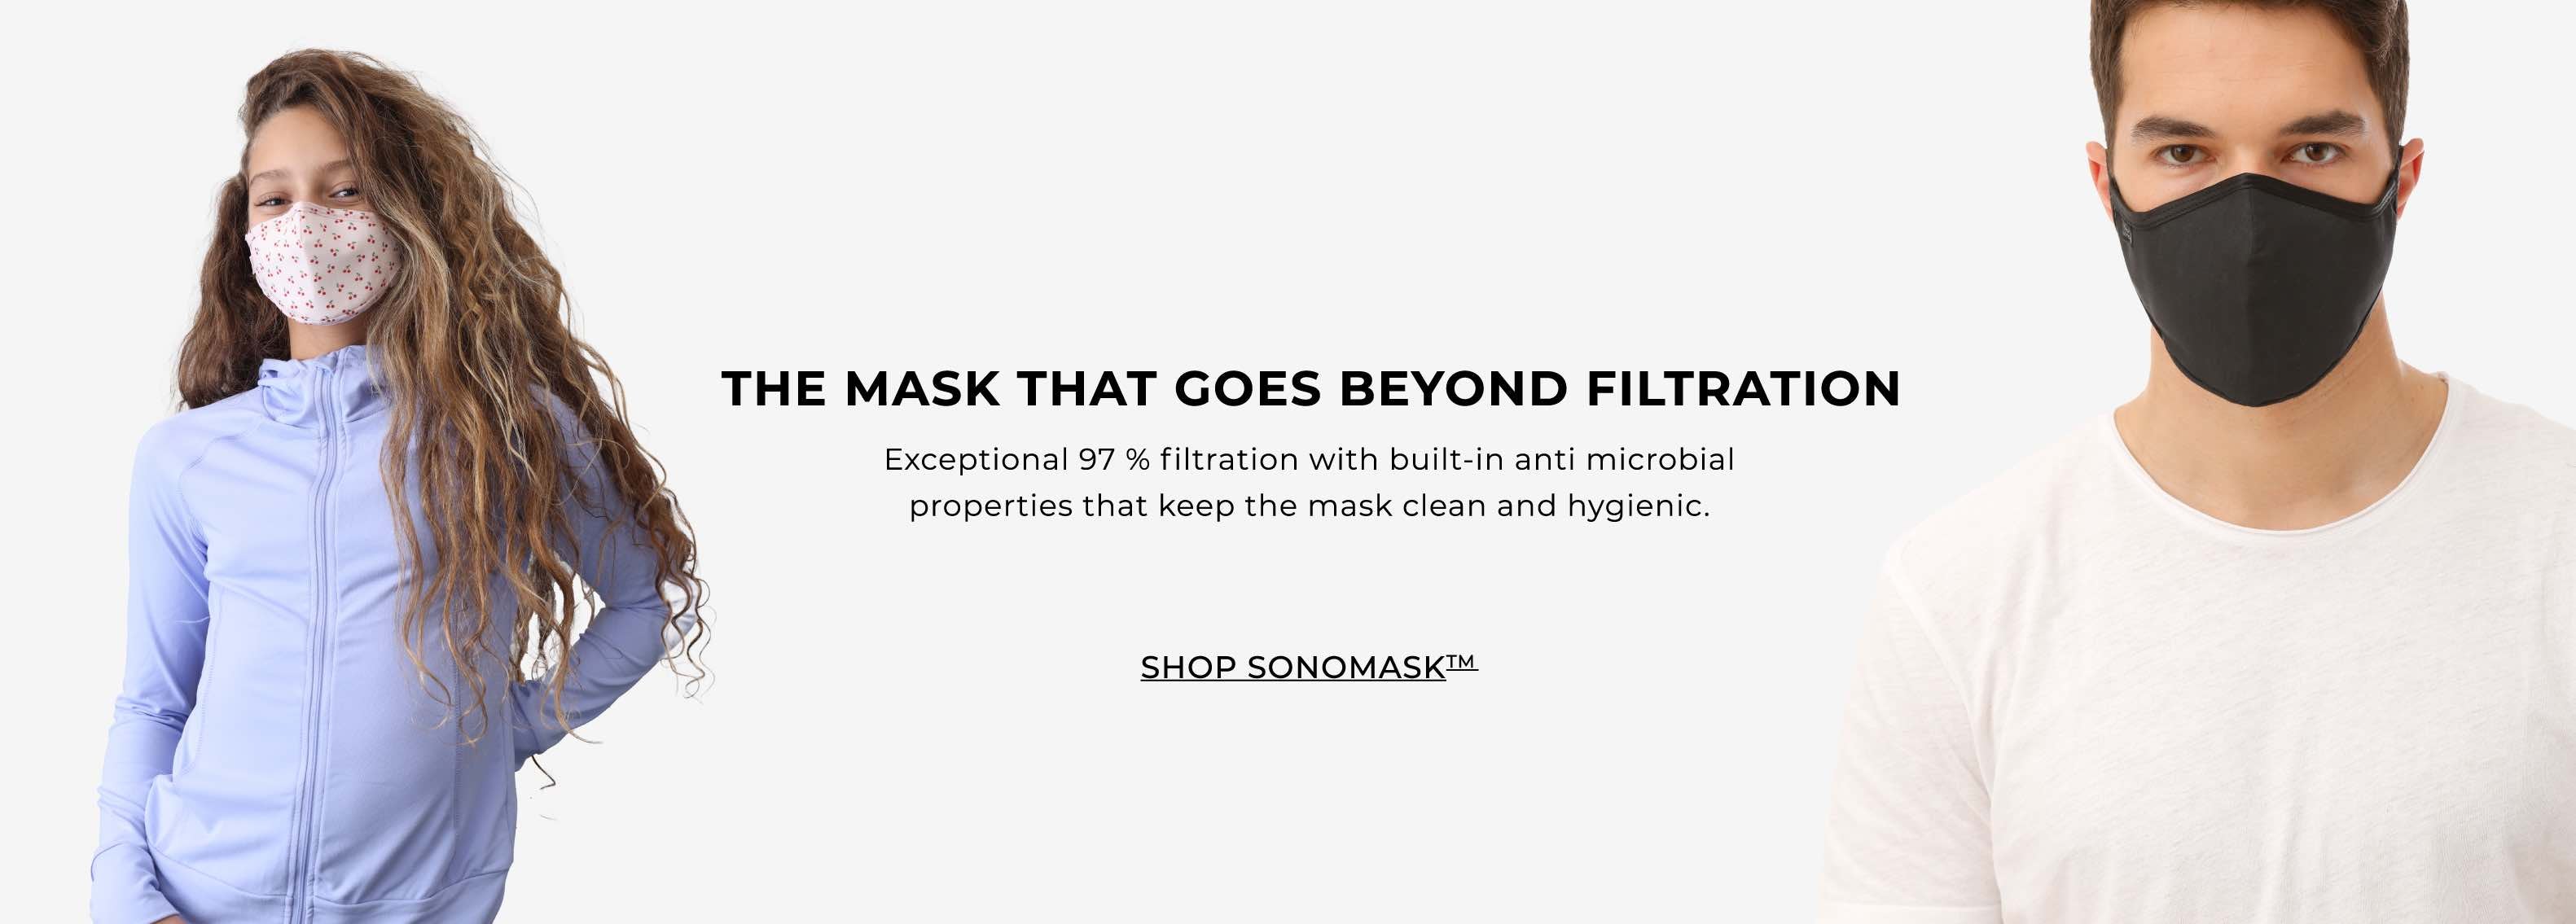 the mask that goes beyond filtration